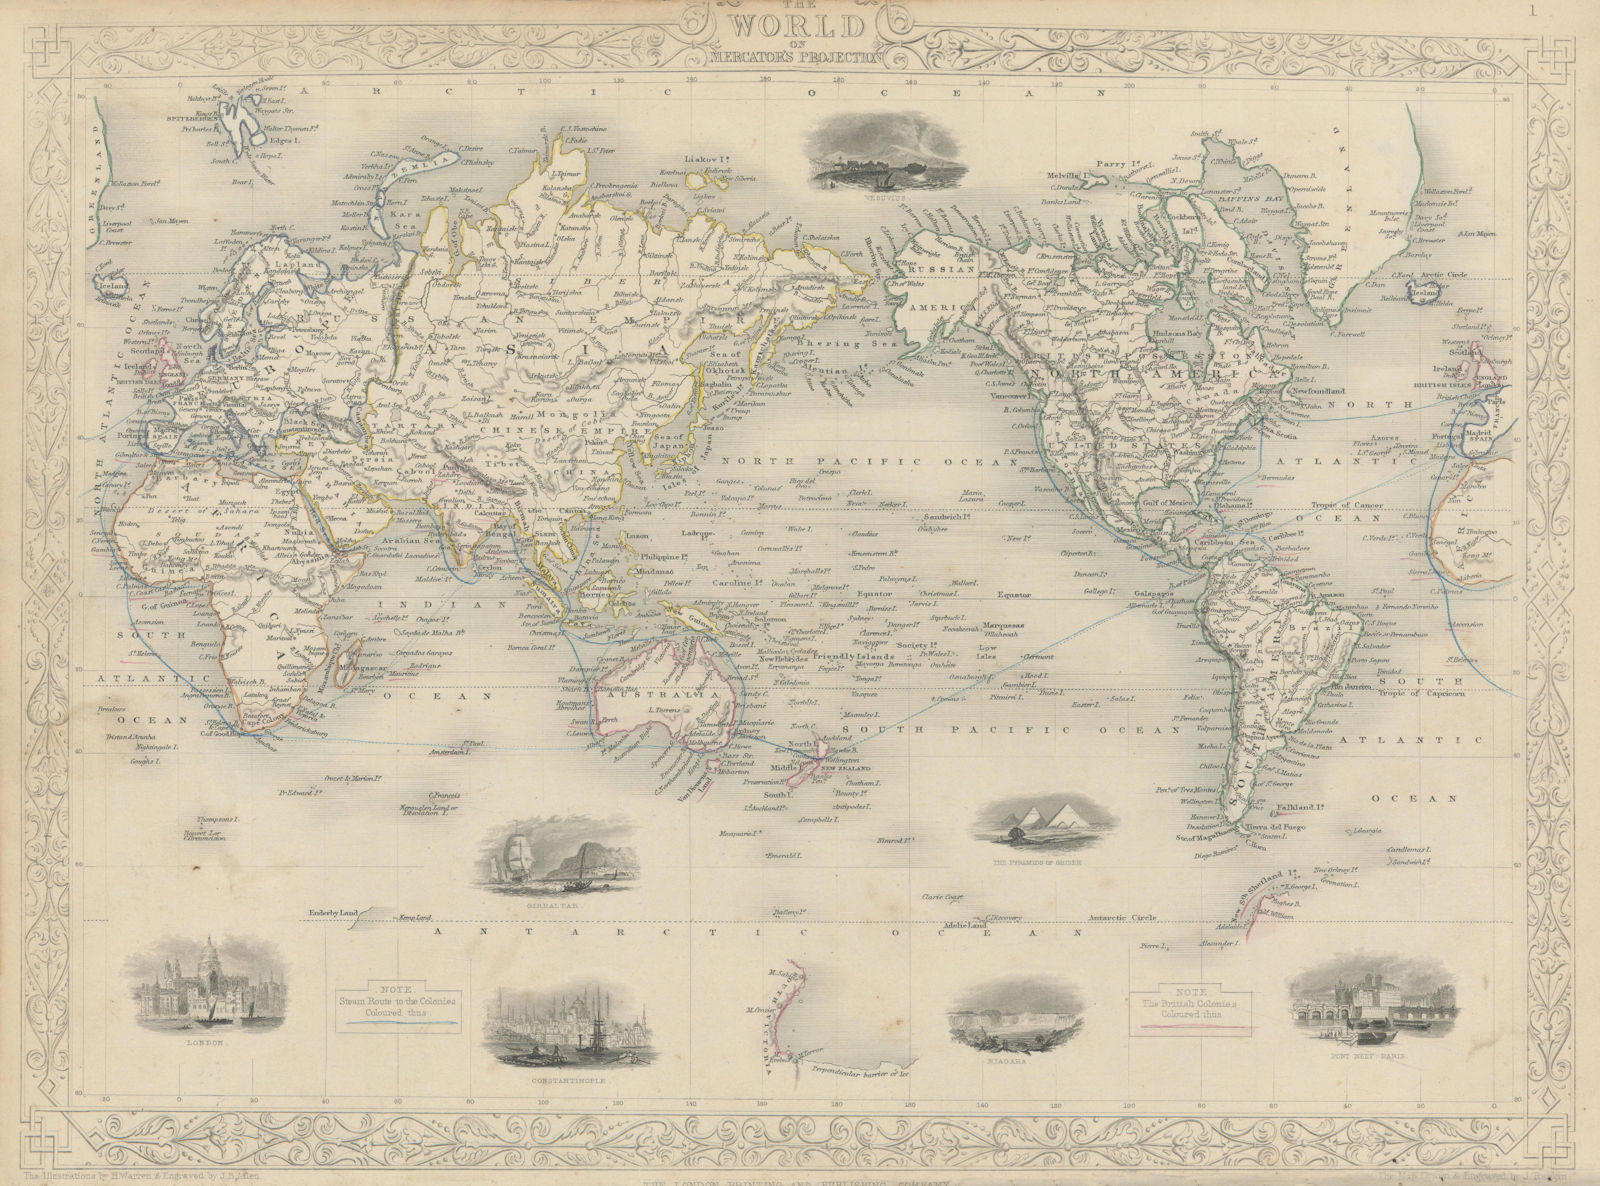 BRITISH EMPIRE. Shows steam routes to the colonies.World. RAPKIN/TALLIS 1851 map